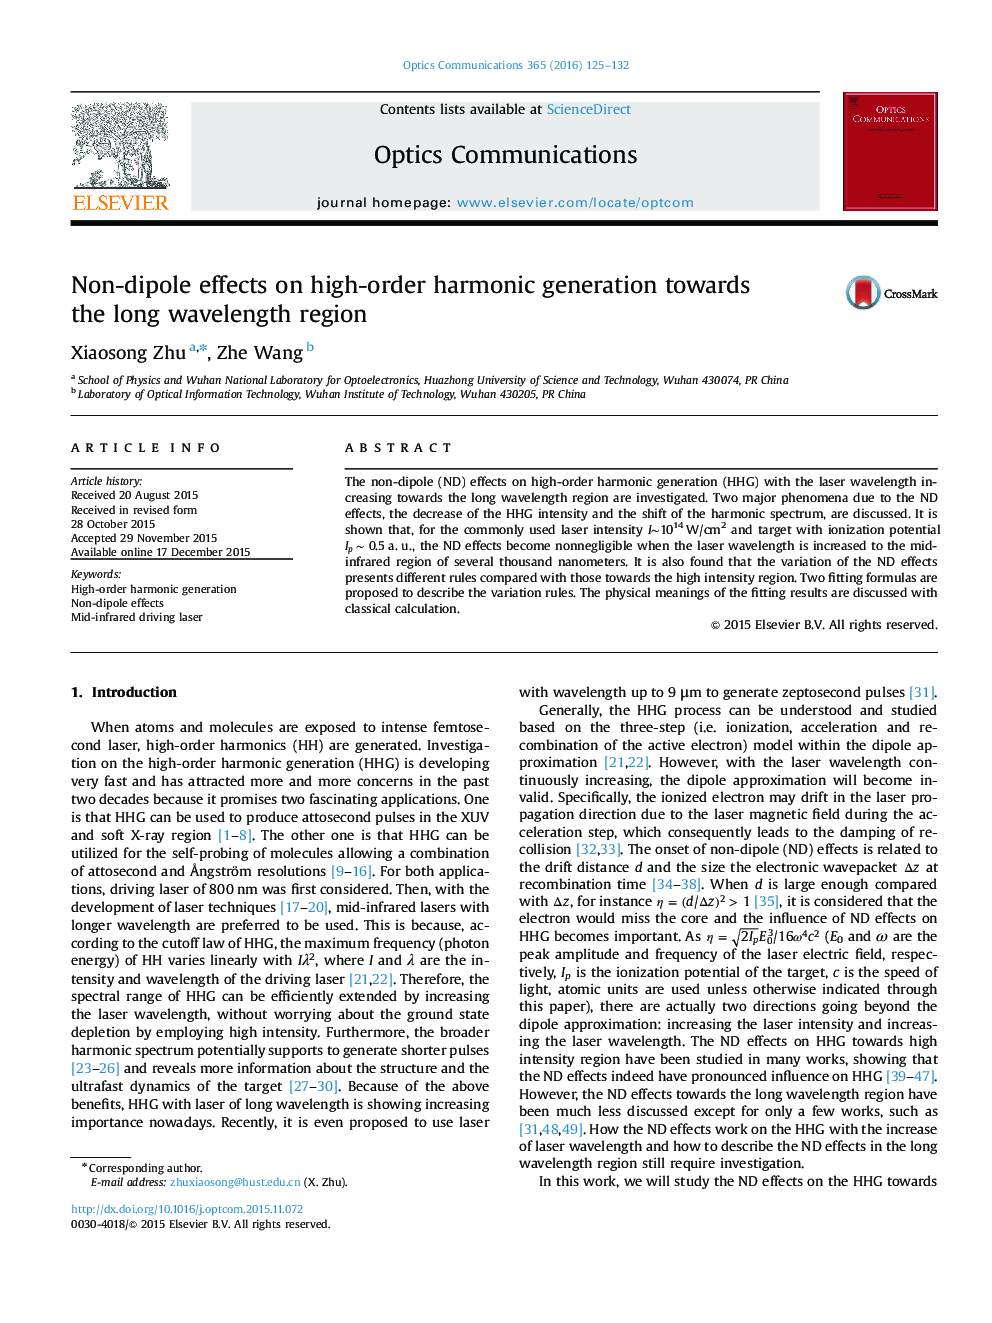 Non-dipole effects on high-order harmonic generation towards the long wavelength region